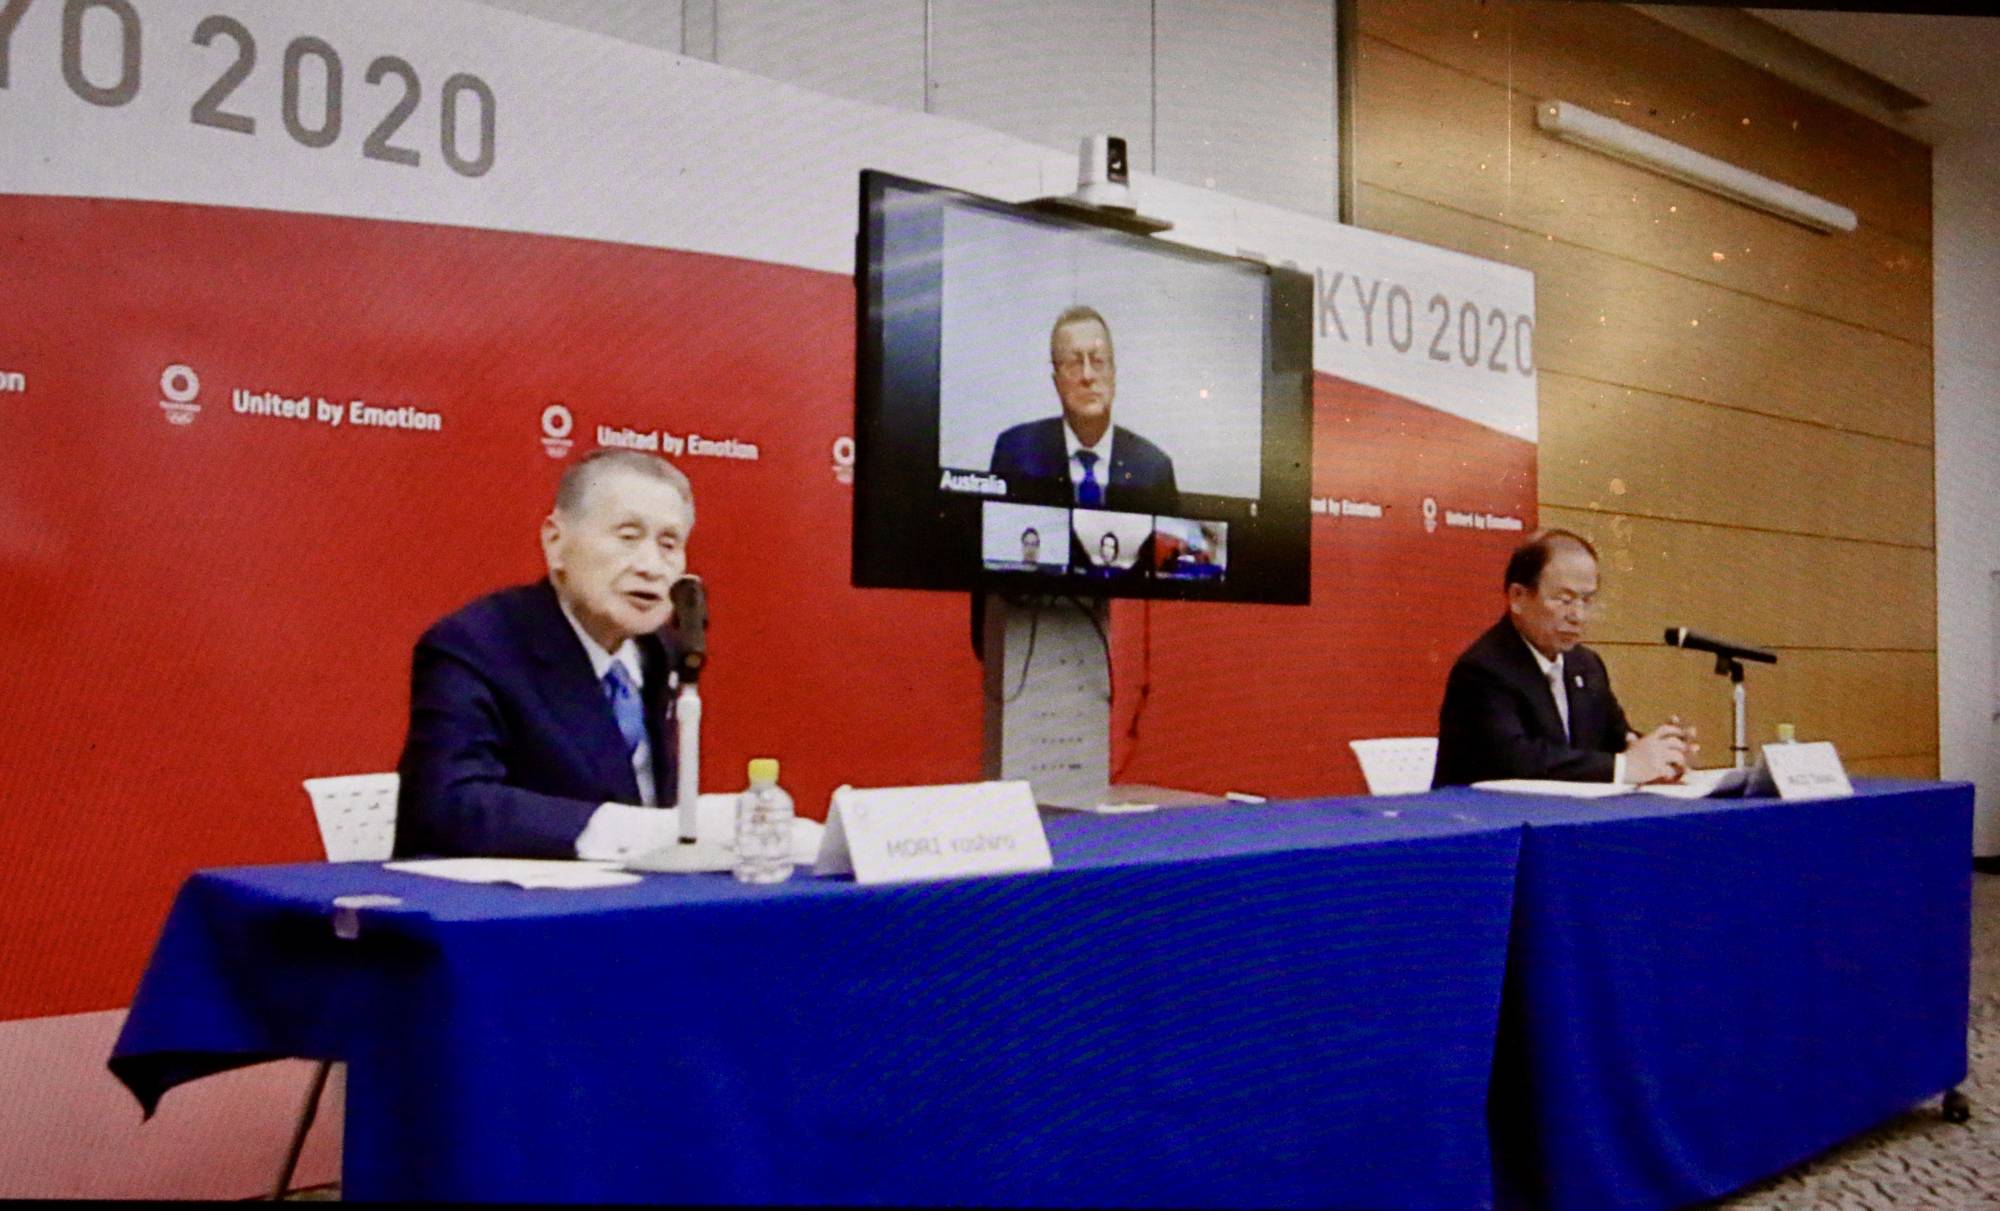 Yoshiro Mori (left), president of the organizing committee for the Tokyo Olympics and Paralympics, speaks during an online video news conference also attended by organizing committee CEO Toshiro Muto (right) and IOC Coordination Commission chair John Coates (on screen) on Thursday. | KAZ NAGATSUKA